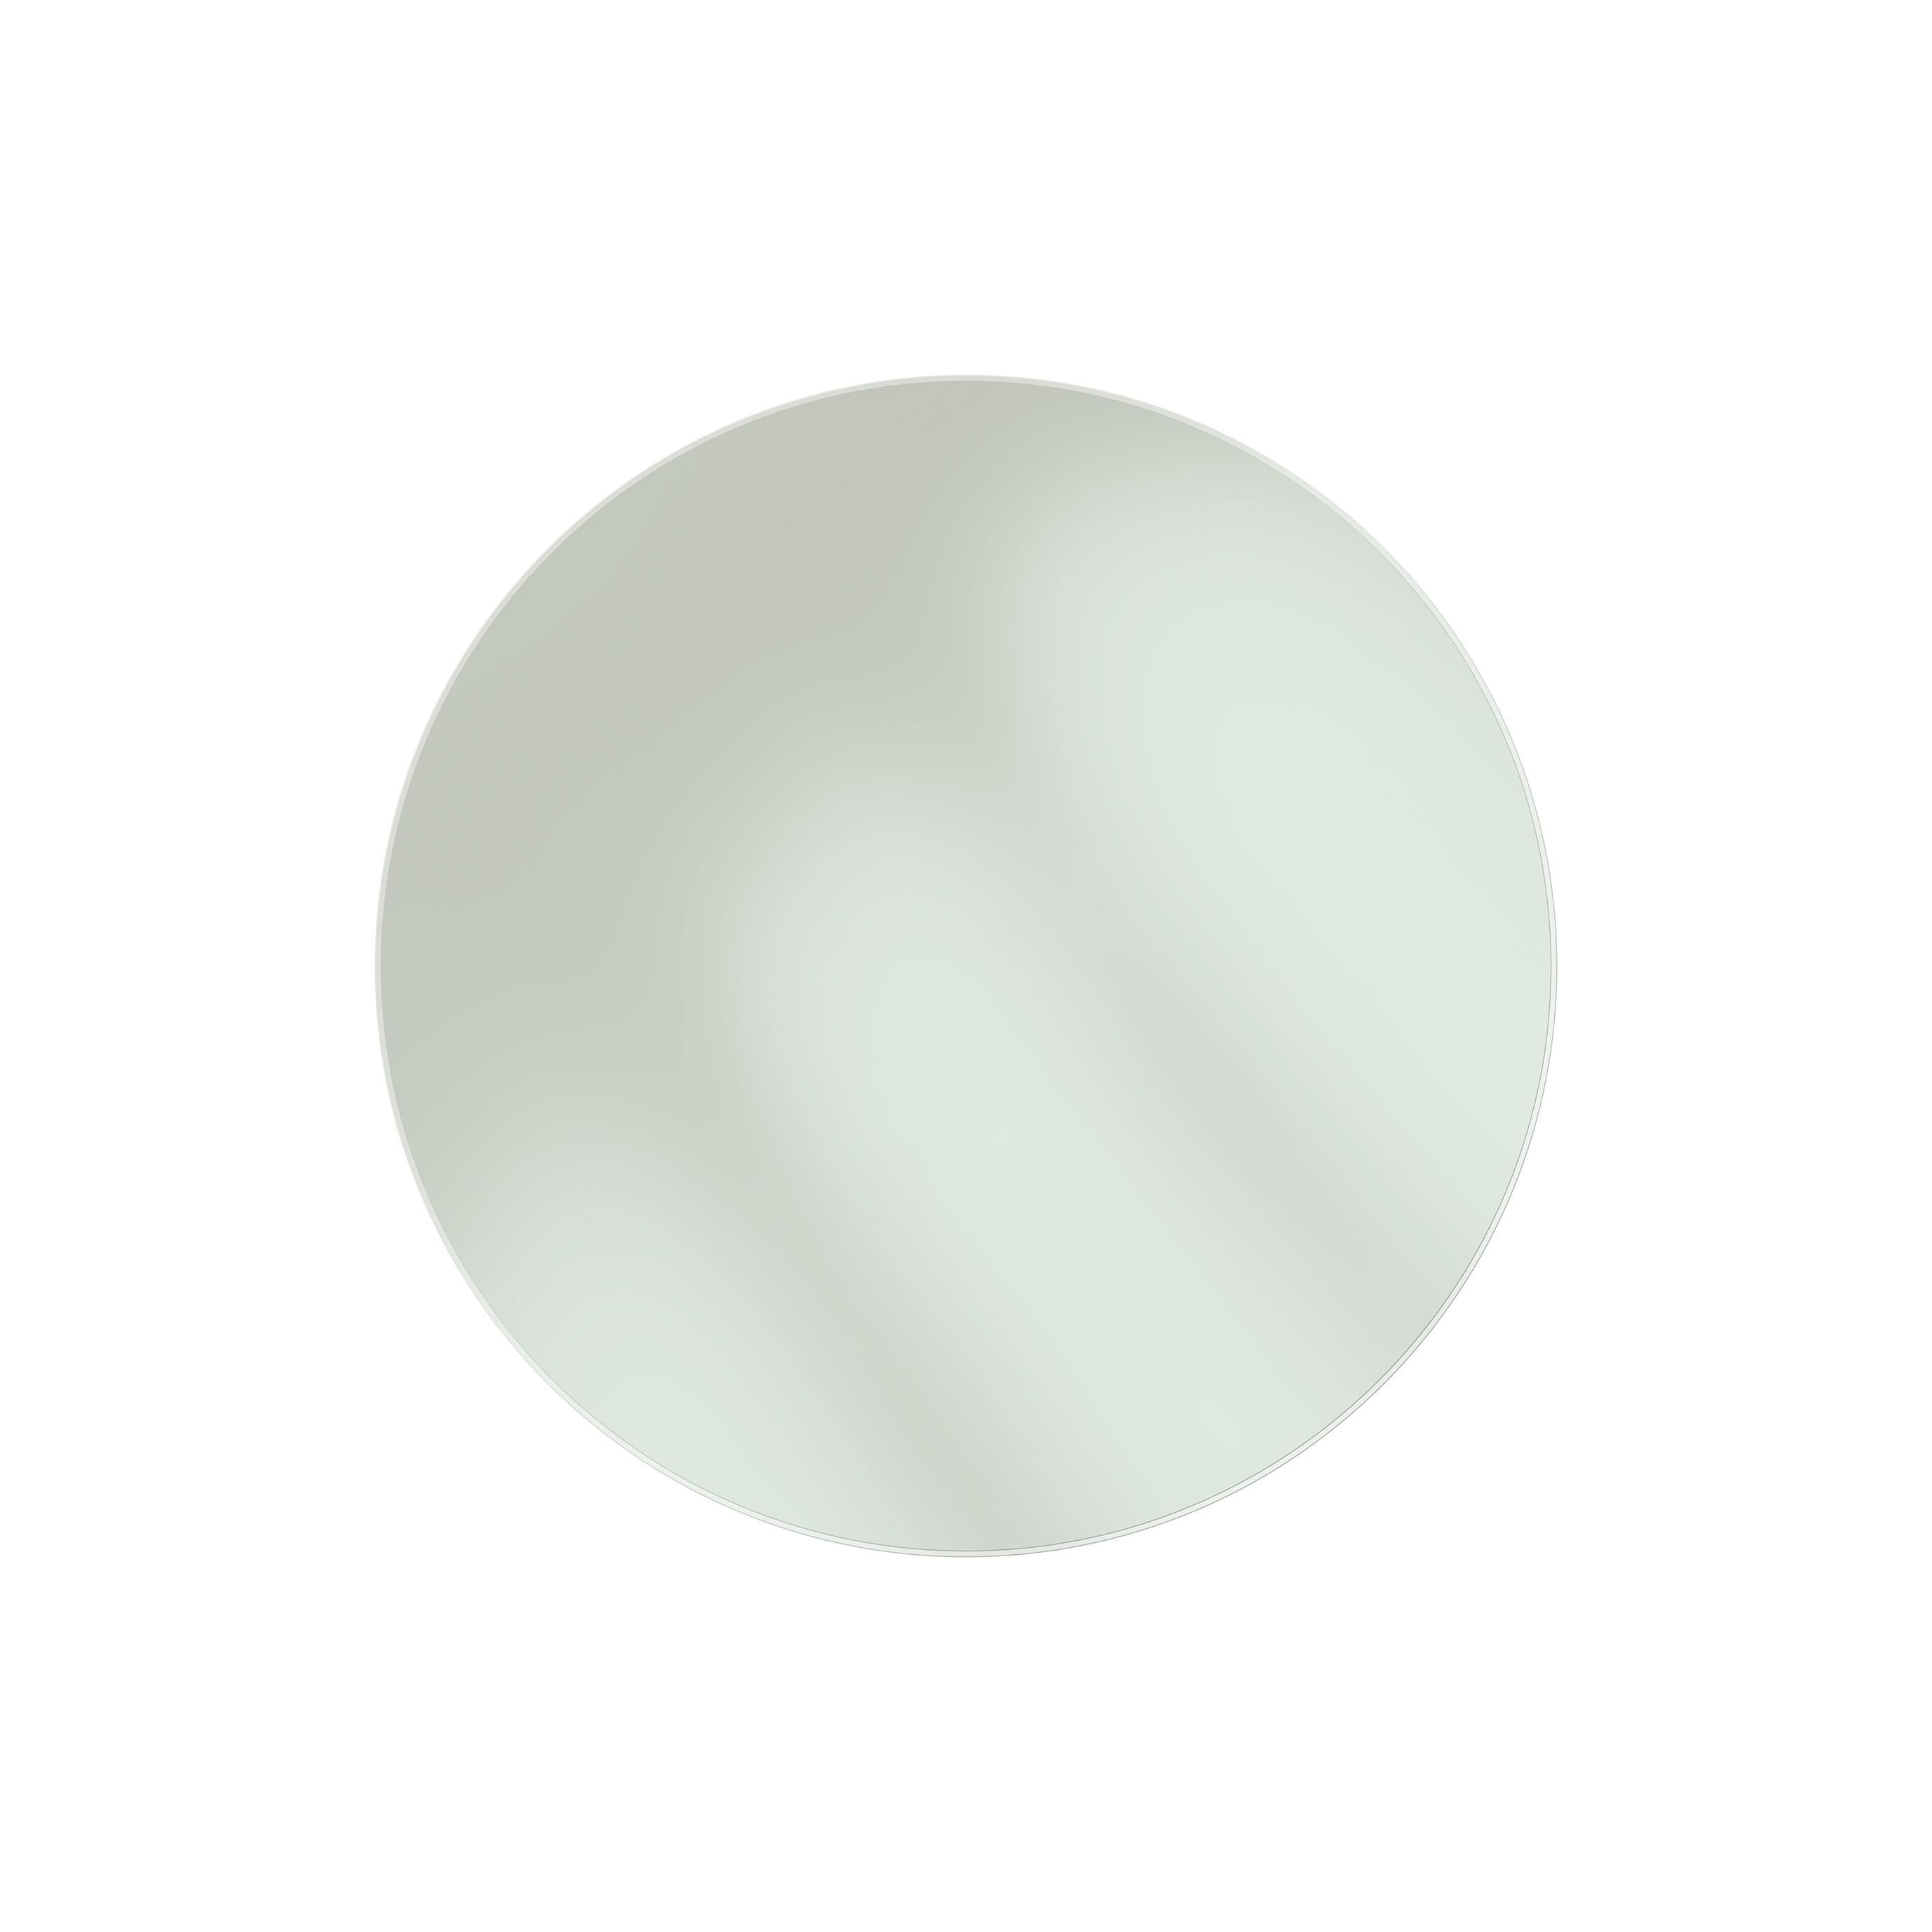 The elegance of simplicity is encapsulated in this green- tinted mirror that features a round and compact shape on a convex glossy aqua-green base. Whether in a living room, dining room, entryway, or bedroom, this mirror will take center stage on a